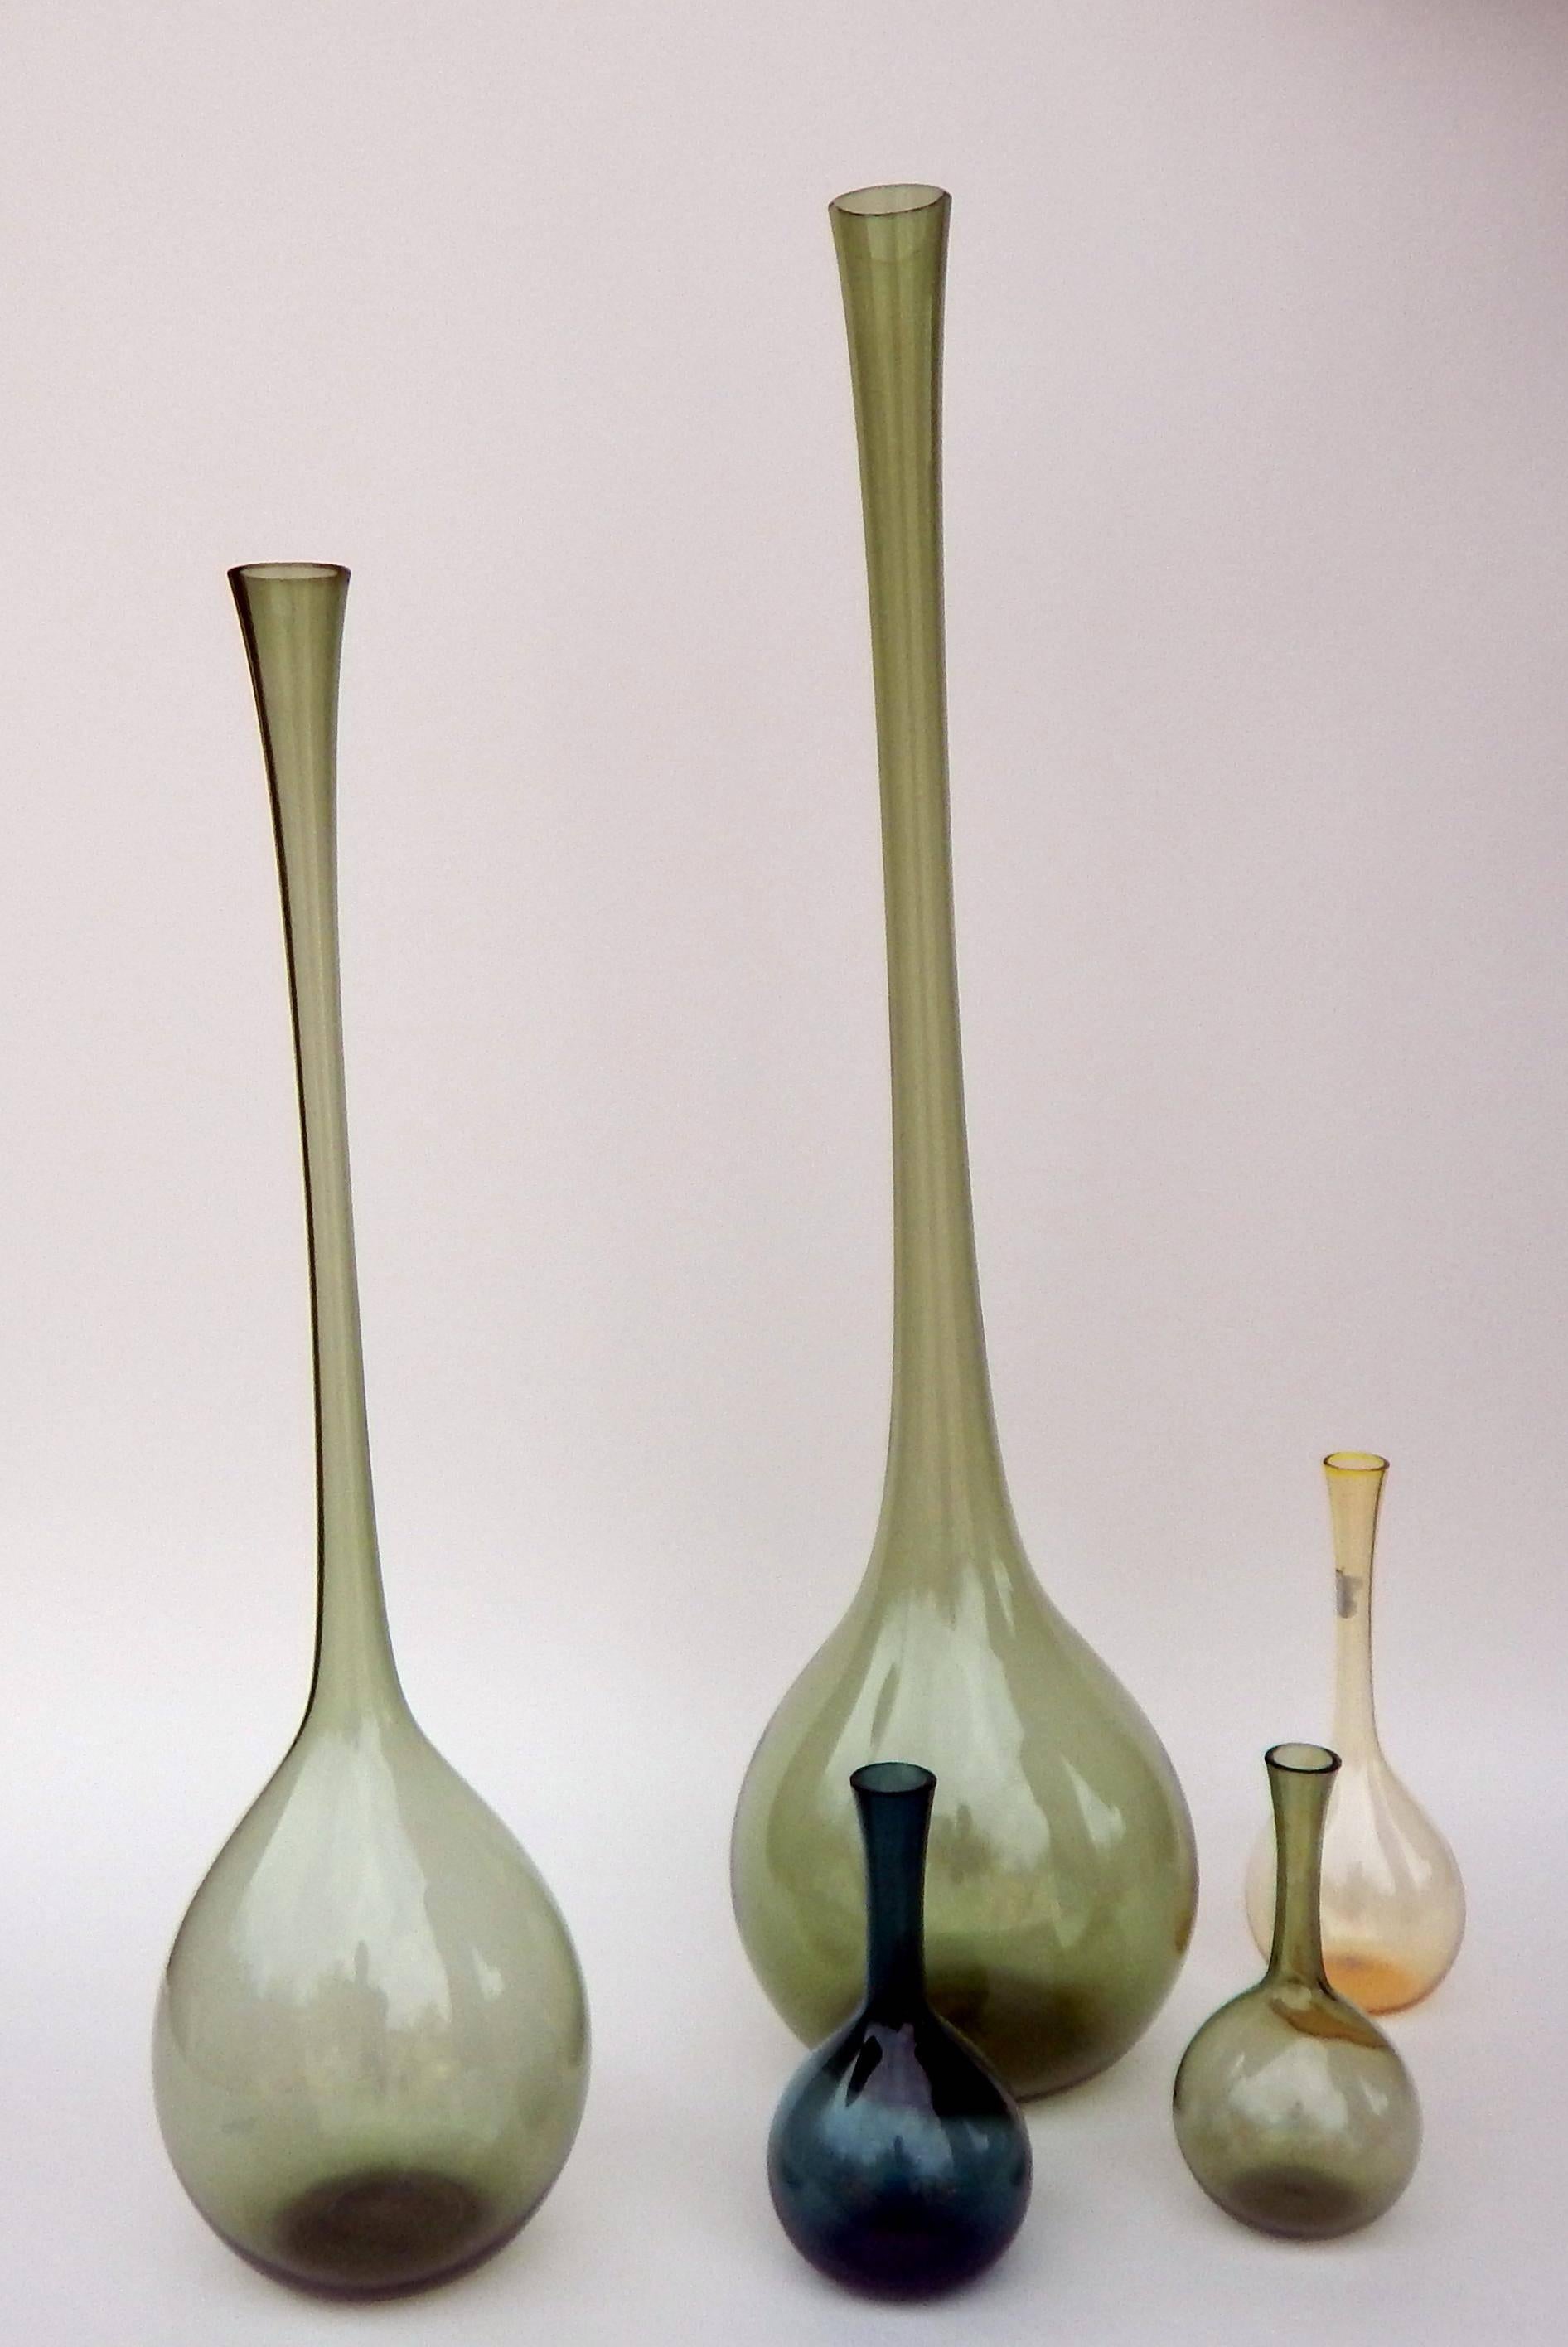 Set of various sized Swedish glass bottles made by Gullaskruf.
Designed by Arthur Percy.

The bottles measure largest to smallest:
21